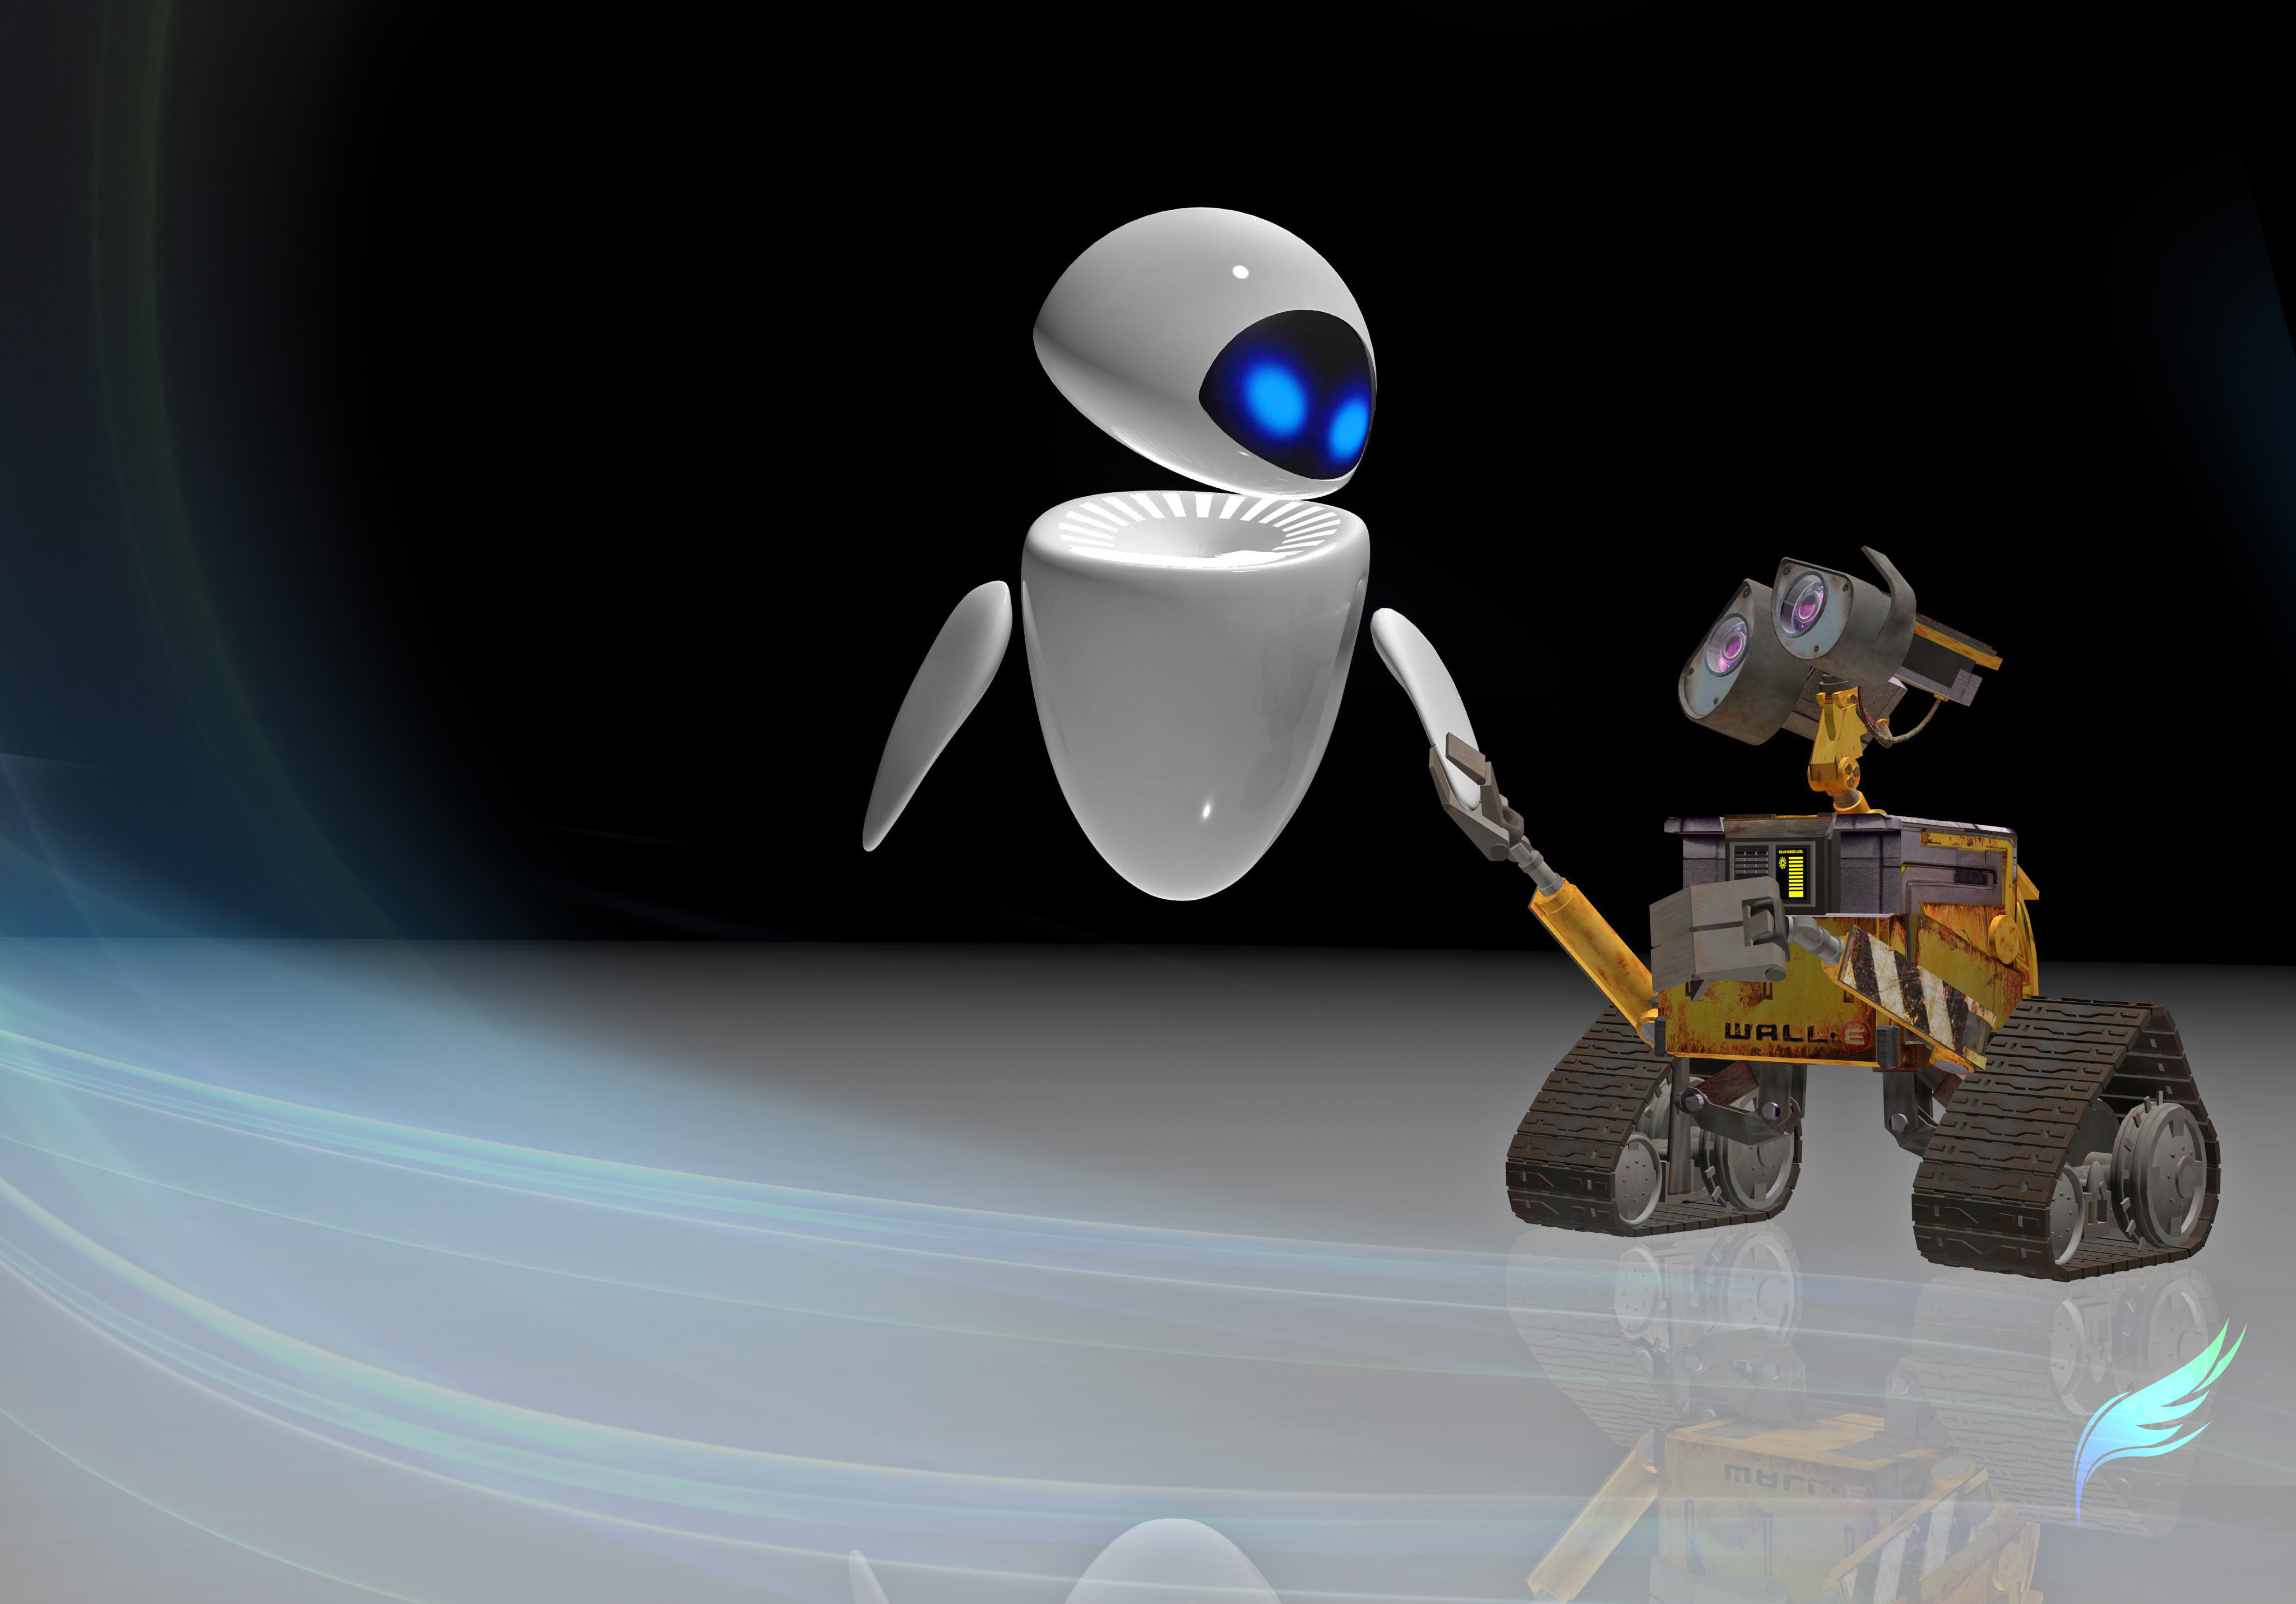 My Wall E Proyect By Youcan619 On DeviantArt